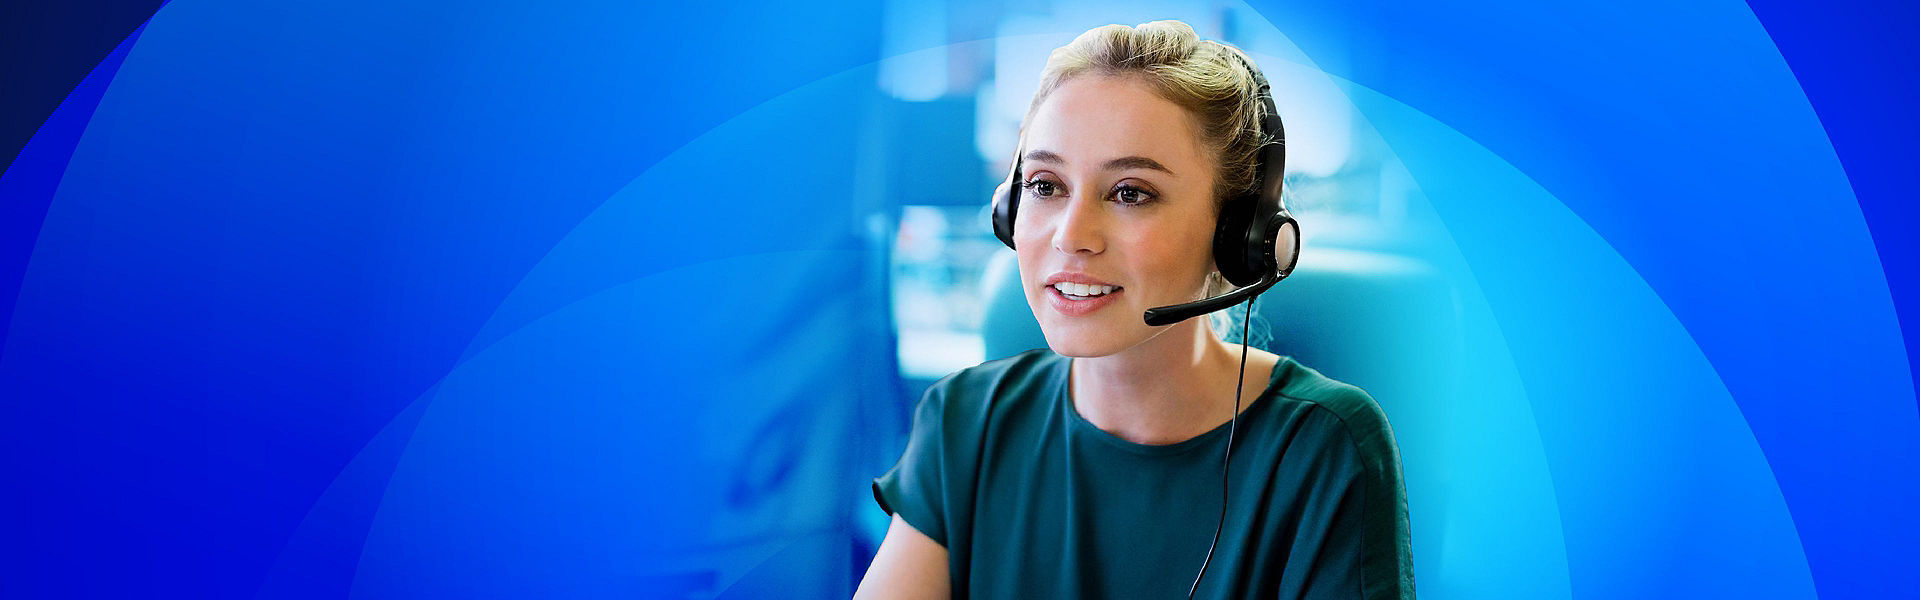 Woman using a headset for working